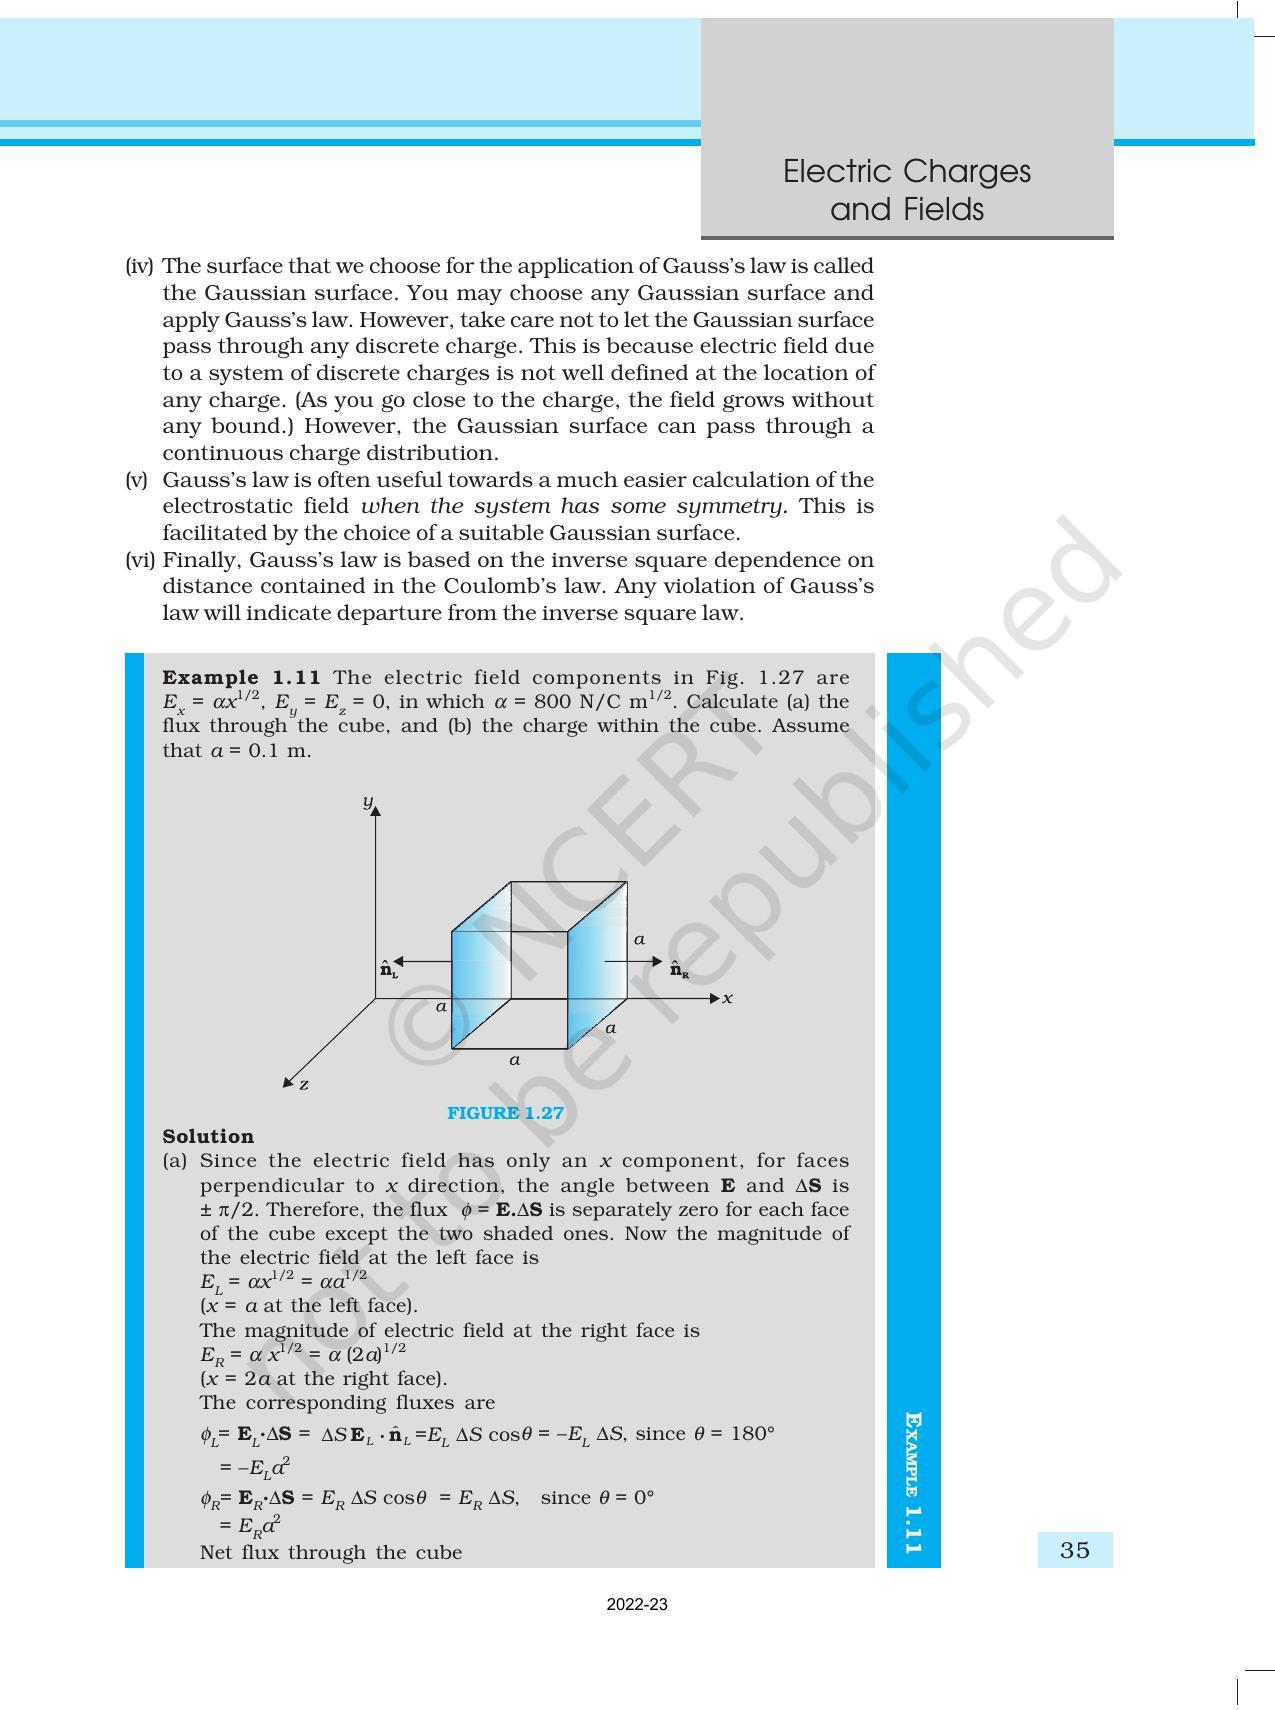 NCERT Book for Class 12 Physics Chapter 1 Electric Charges and Fields - Page 35